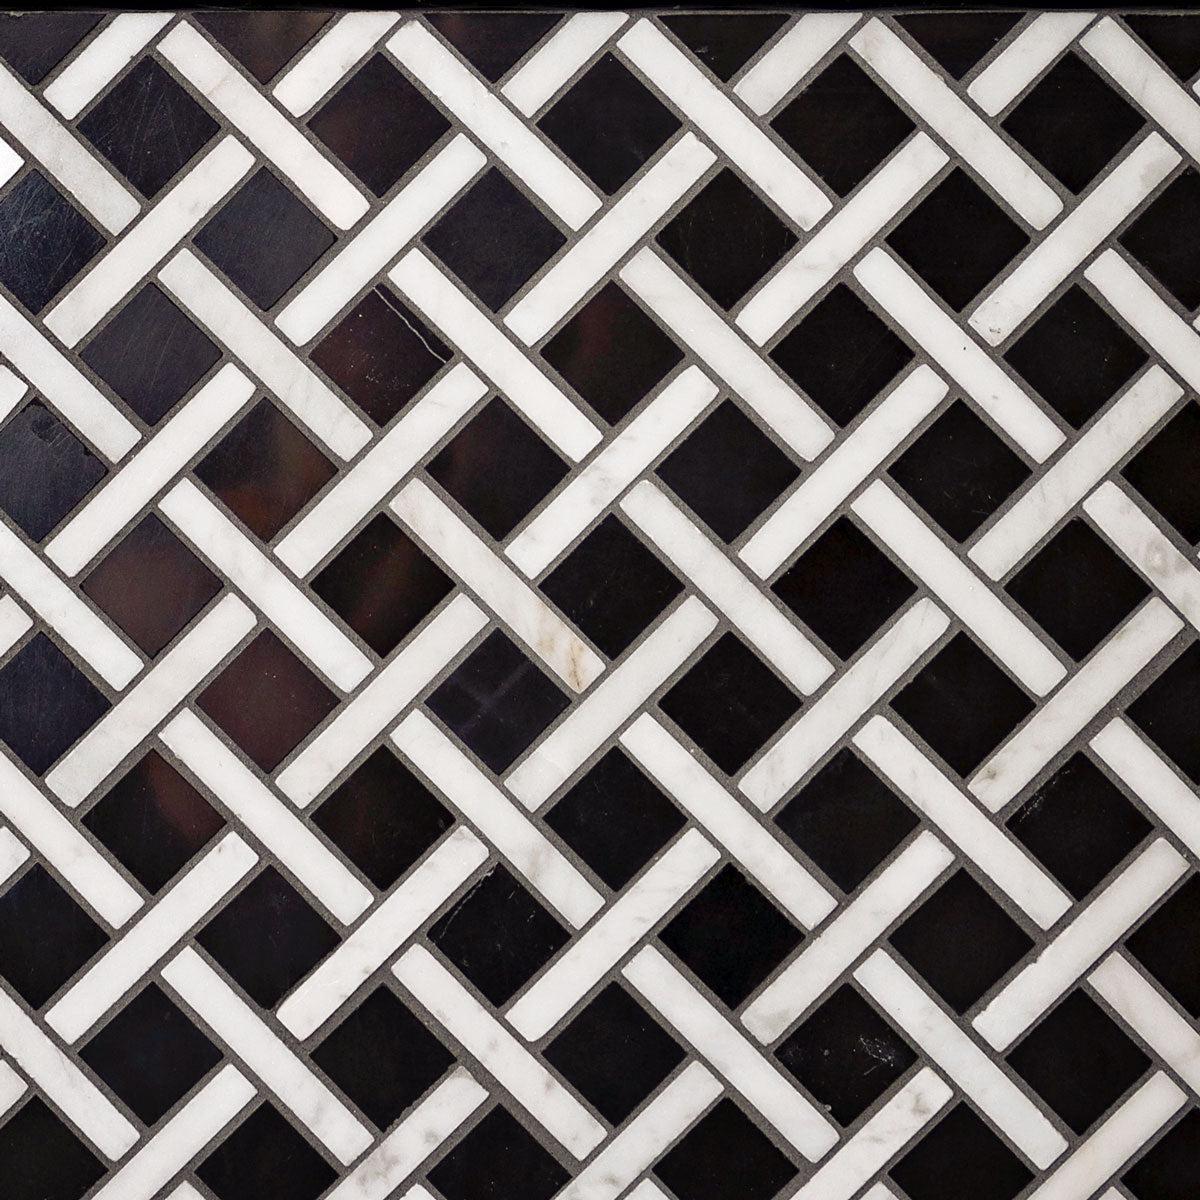 Black and White Marble Basket Weave Tile